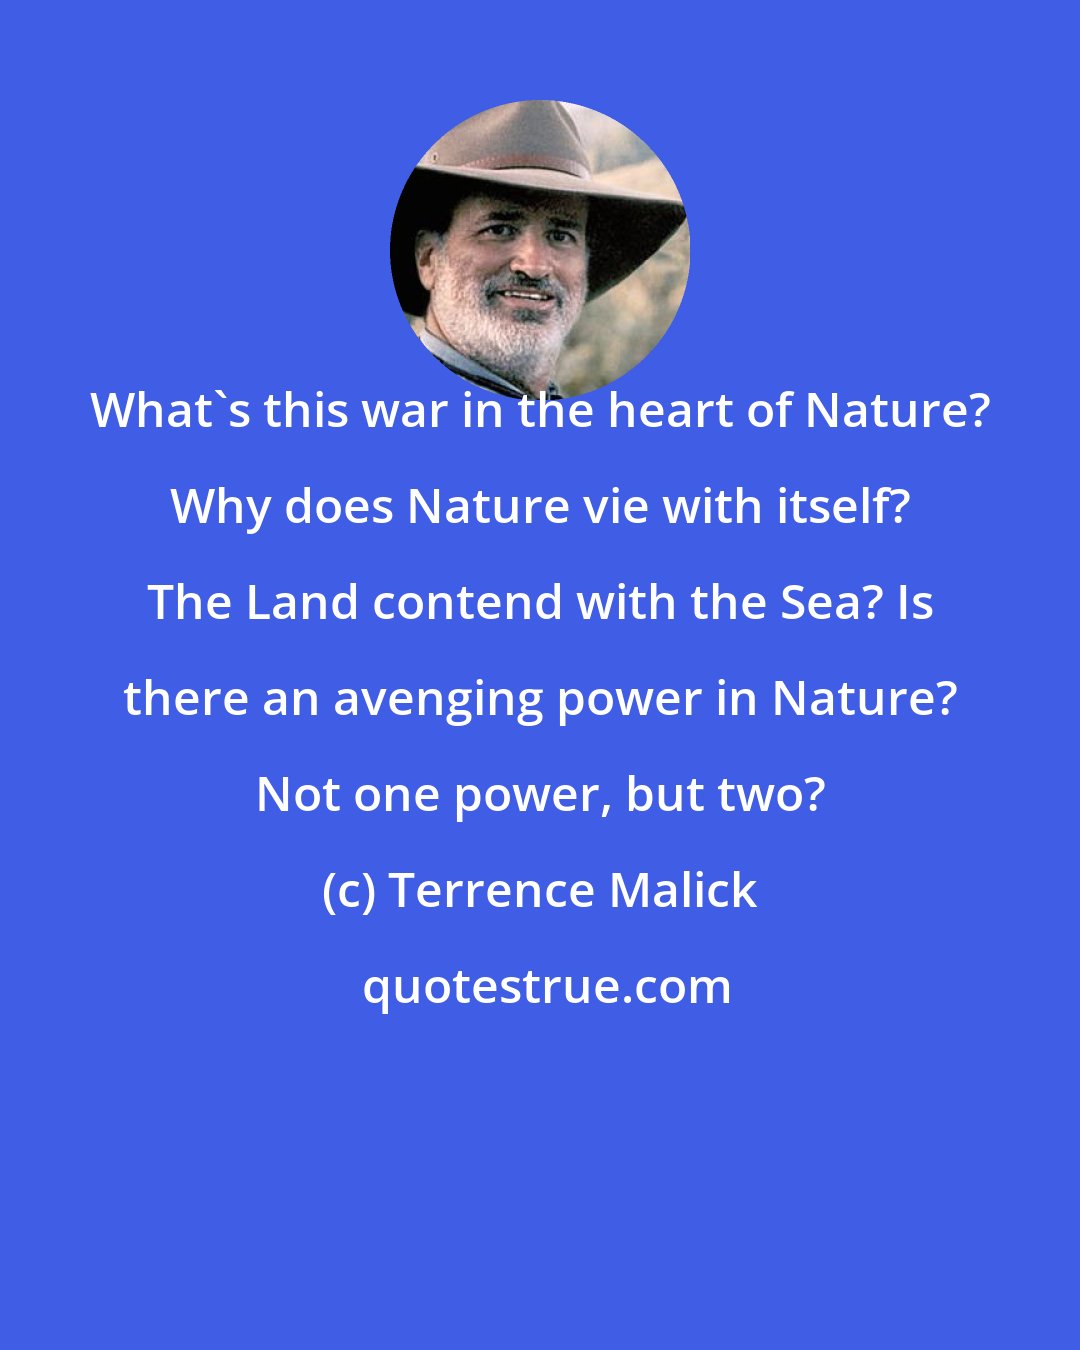 Terrence Malick: What's this war in the heart of Nature? Why does Nature vie with itself? The Land contend with the Sea? Is there an avenging power in Nature? Not one power, but two?